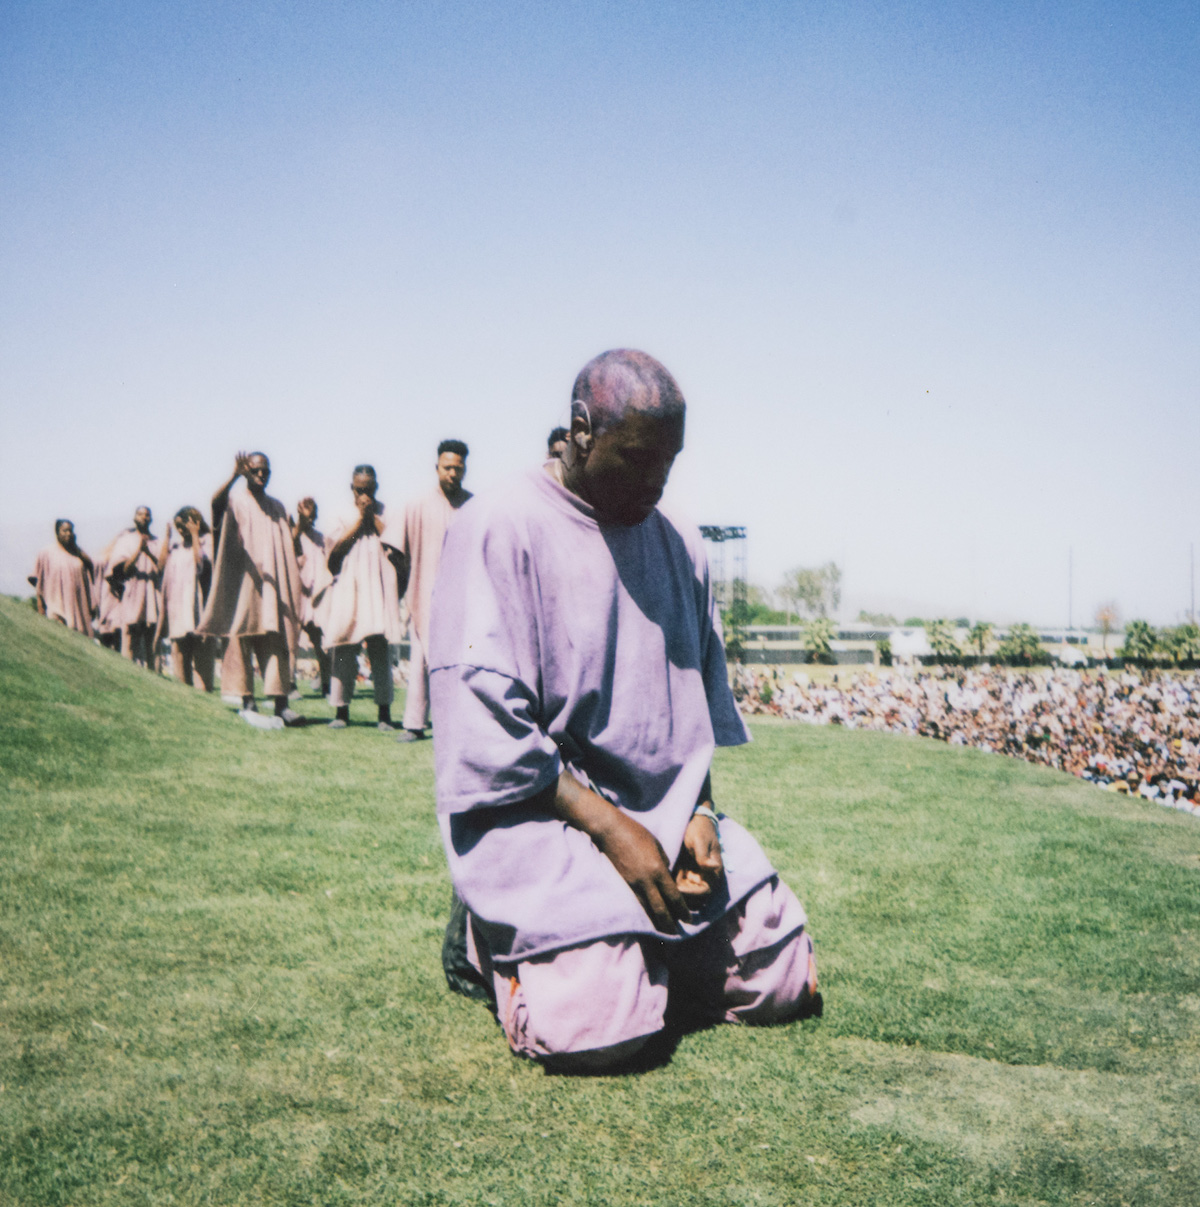 Grass from Kanye's Sunday Service at Coachella is for sale on eBay | Cactus Hugs